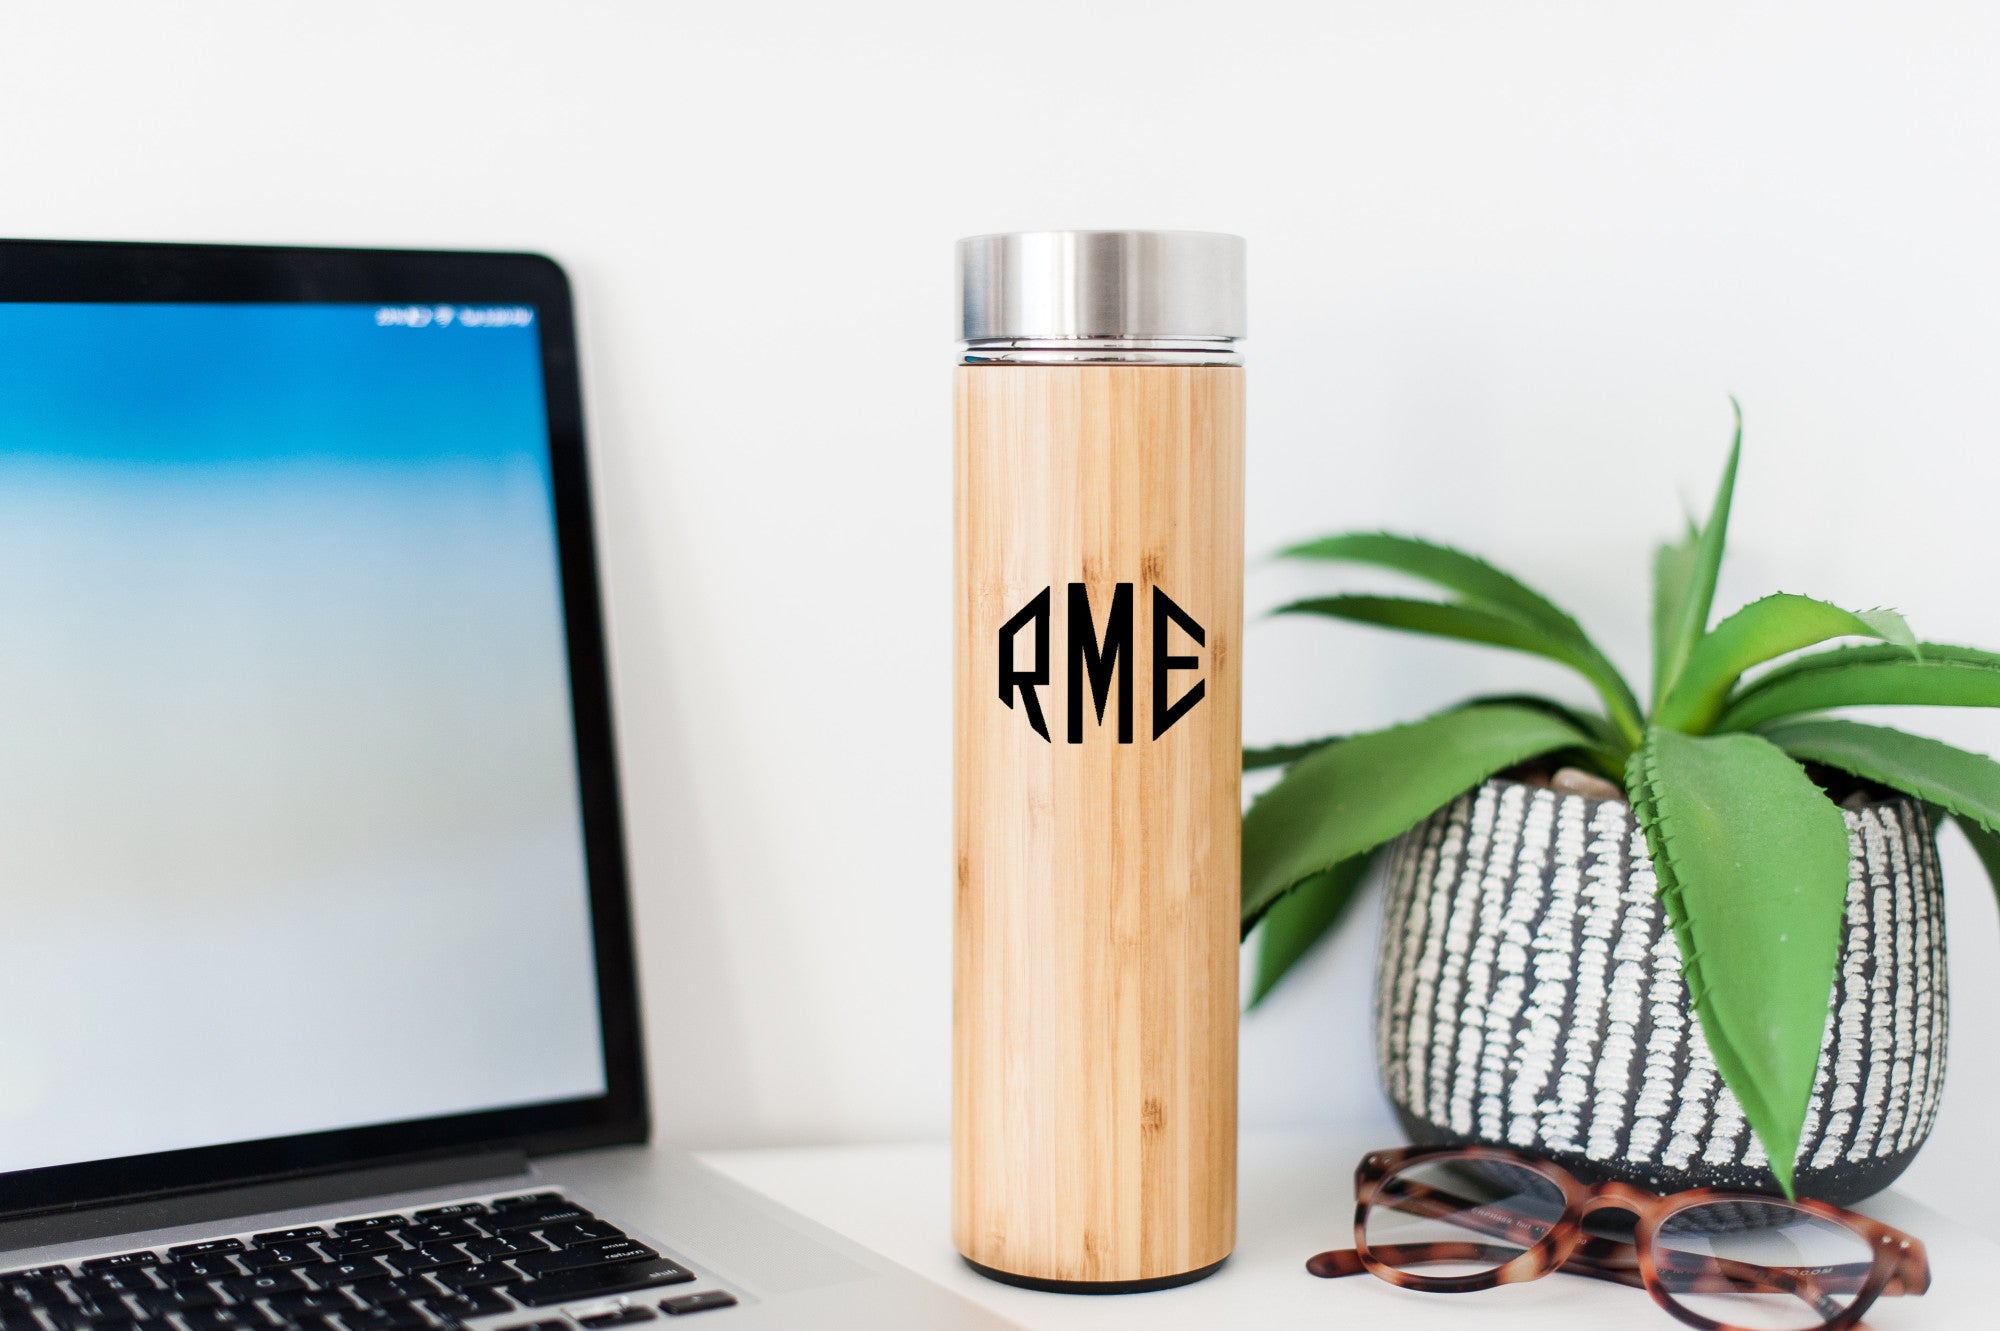 Personalized bamboo water bottle